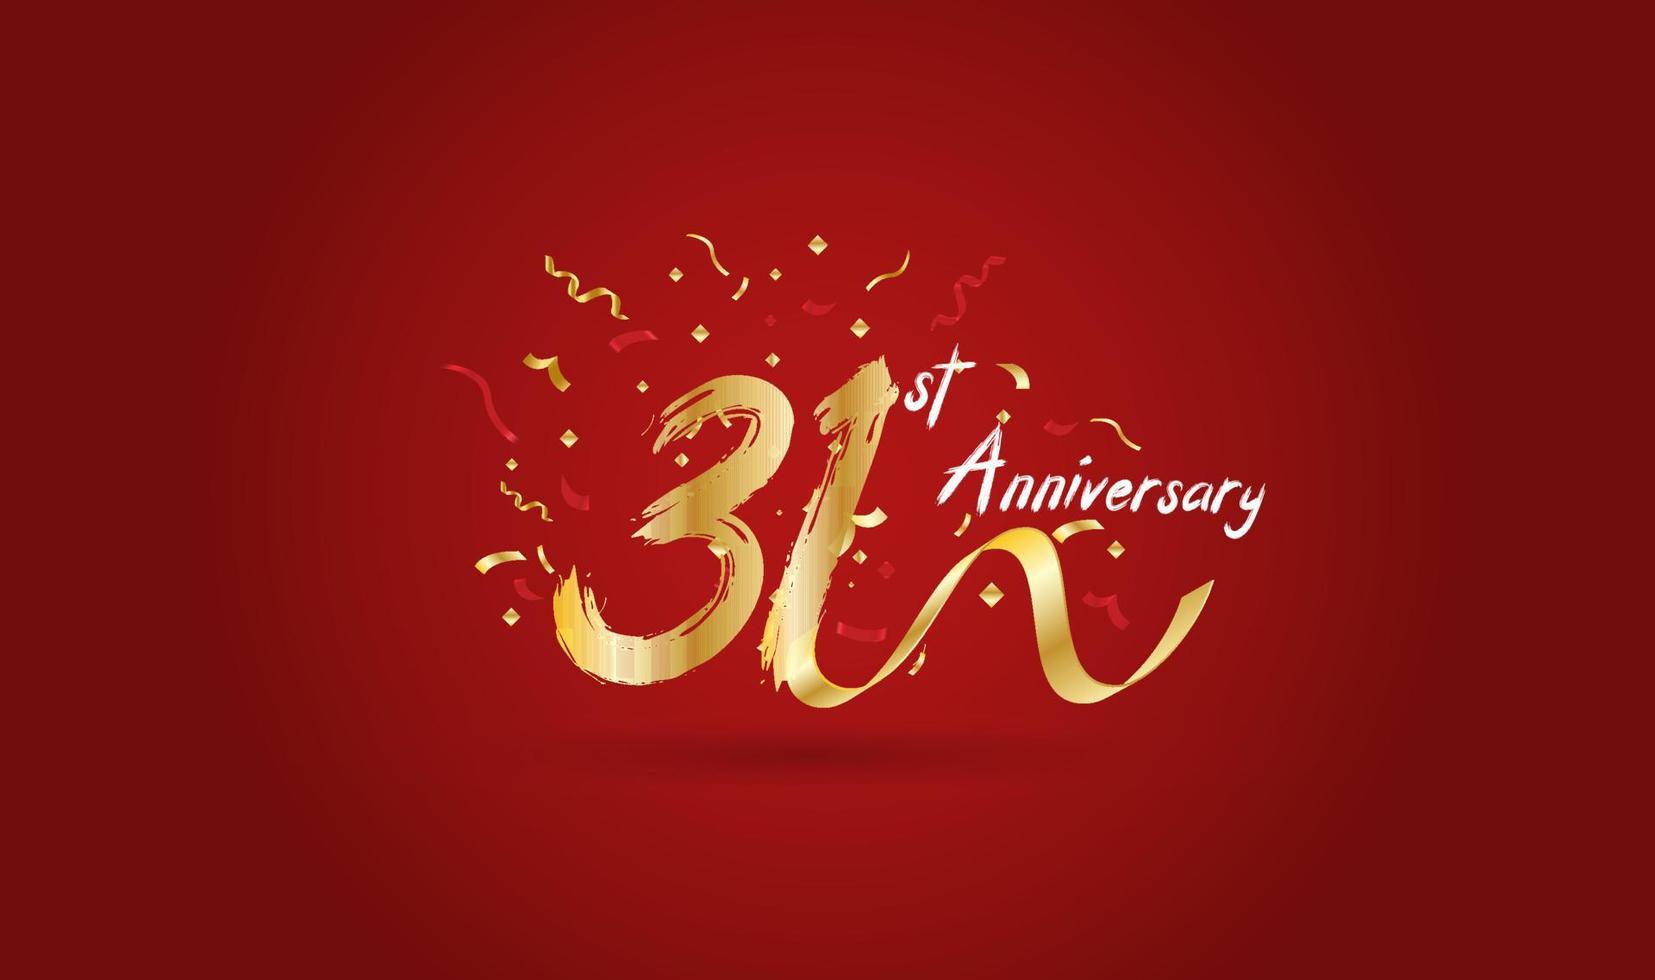 Anniversary celebration background. with the 31st number in gold and with the words golden anniversary celebration. vector